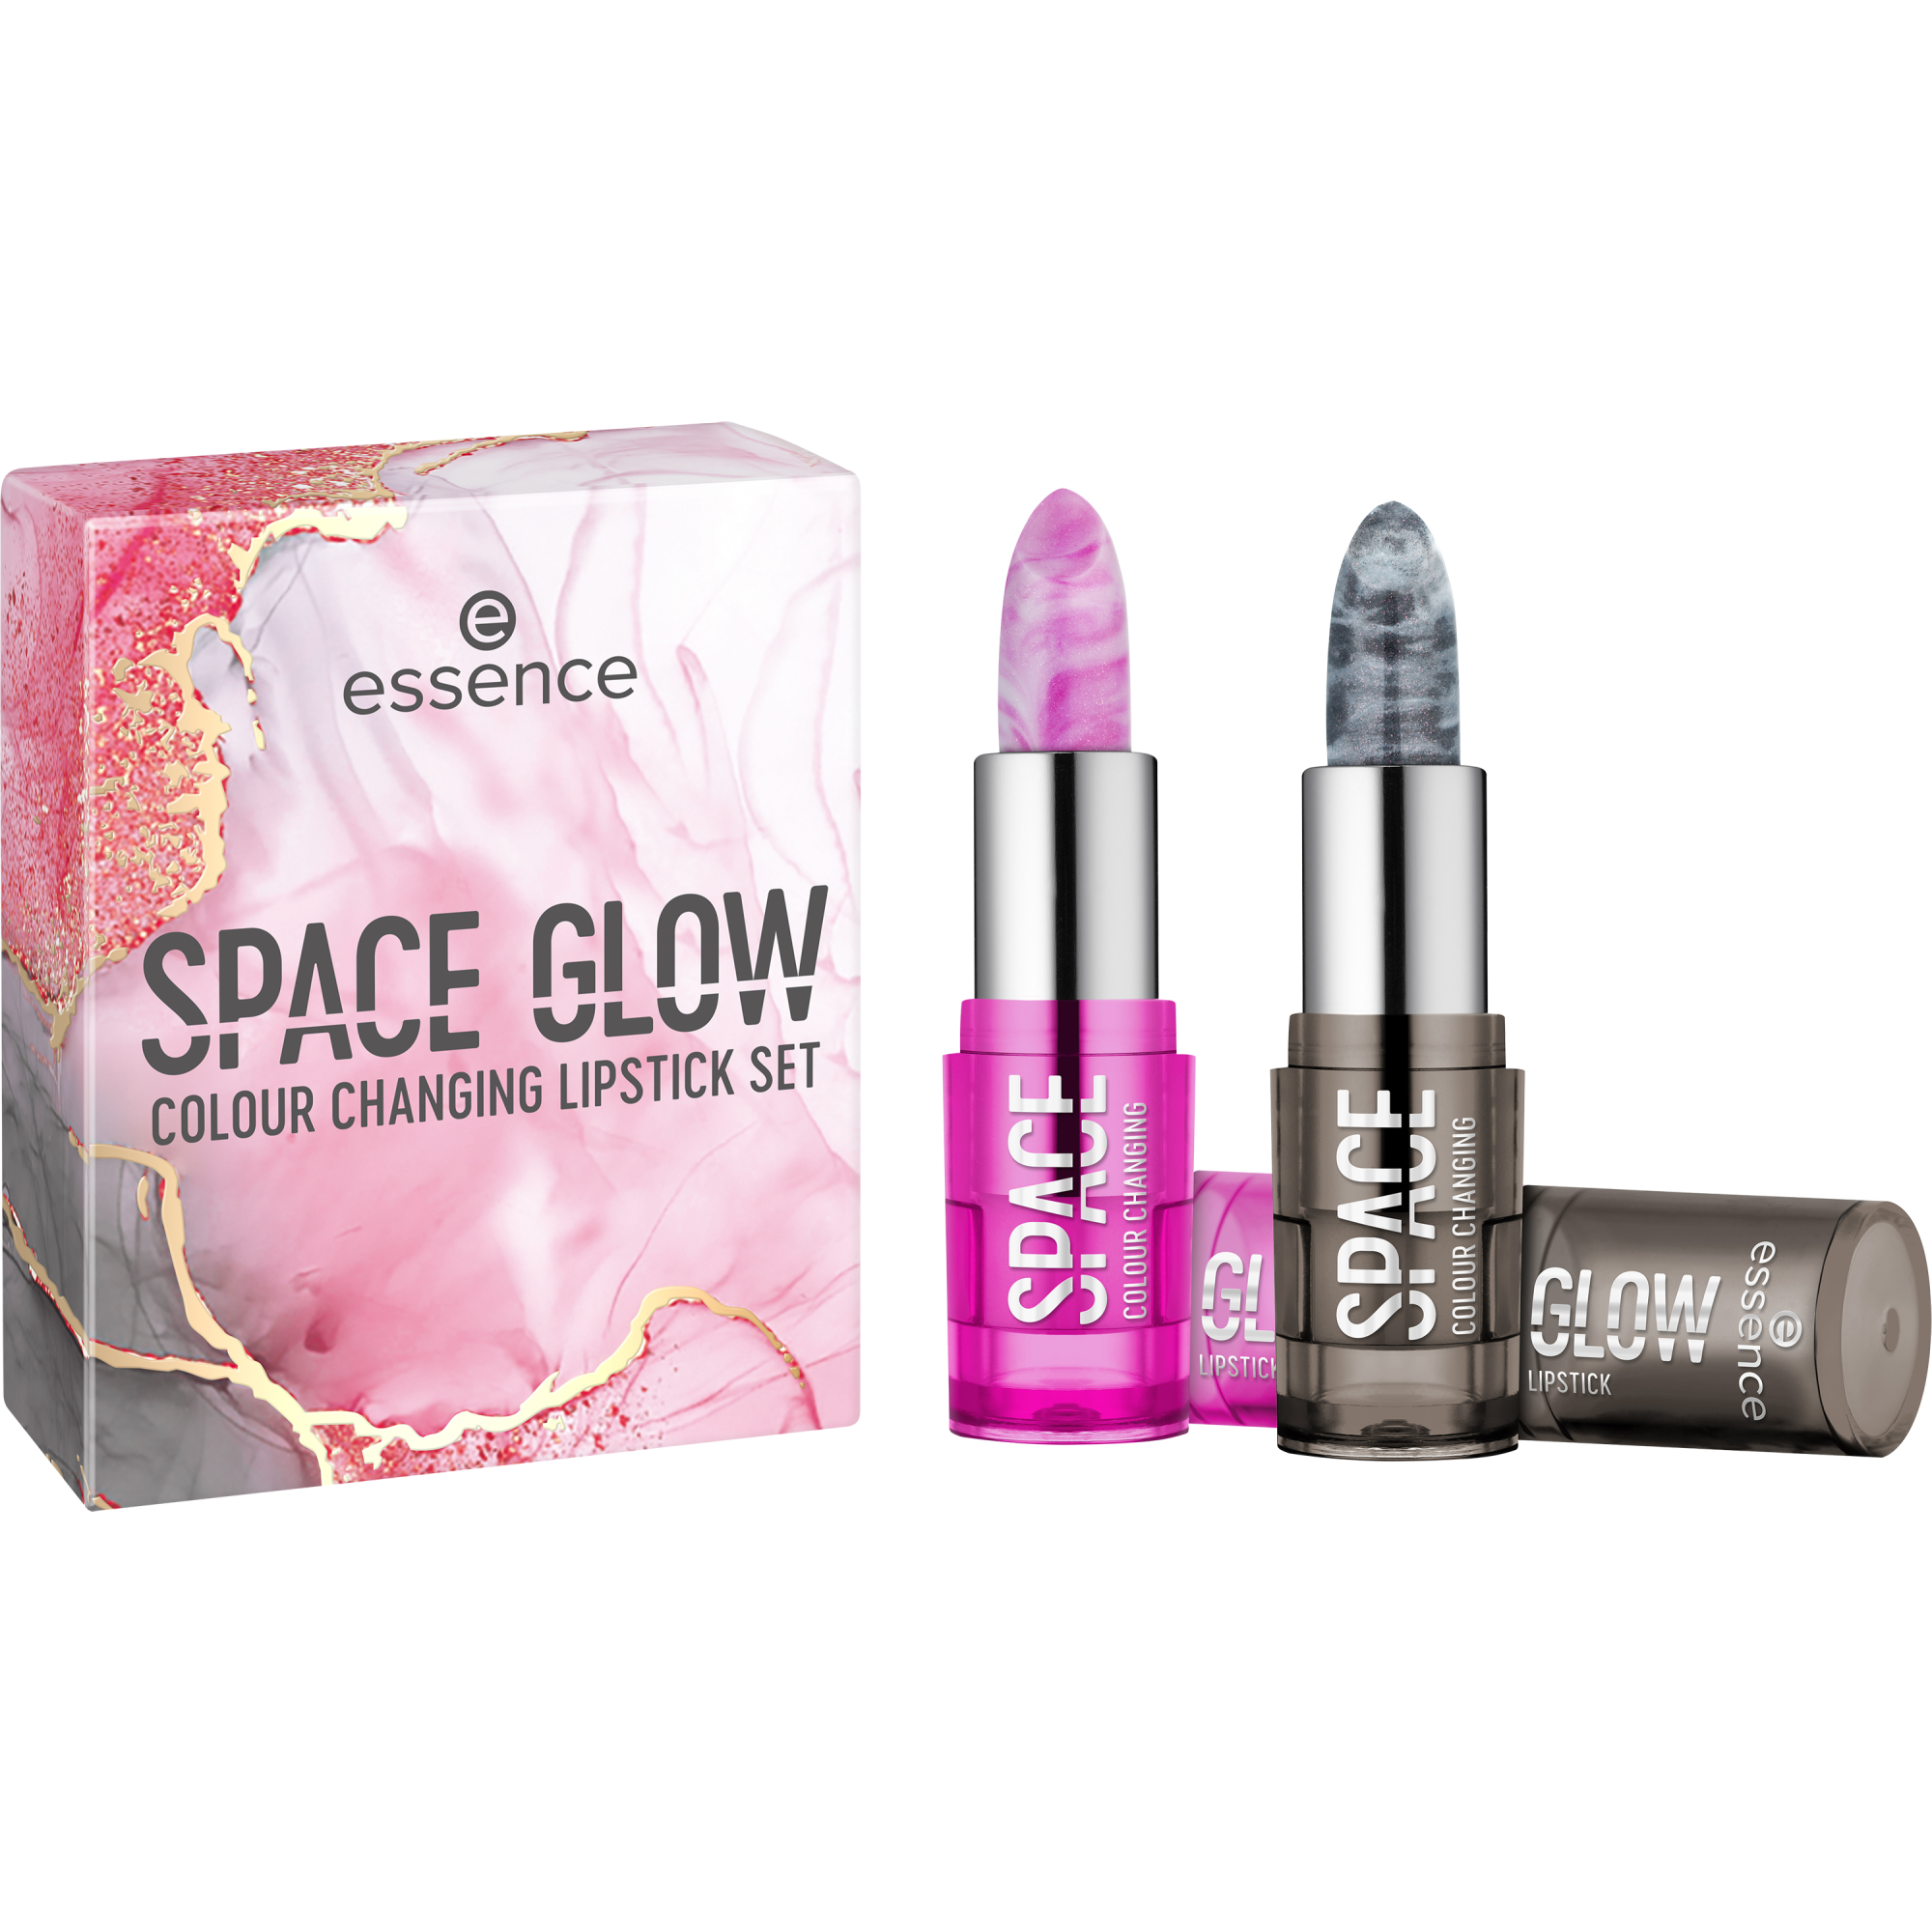 SPACE GLOW COLOUR CHANGING LIPSTICK SET